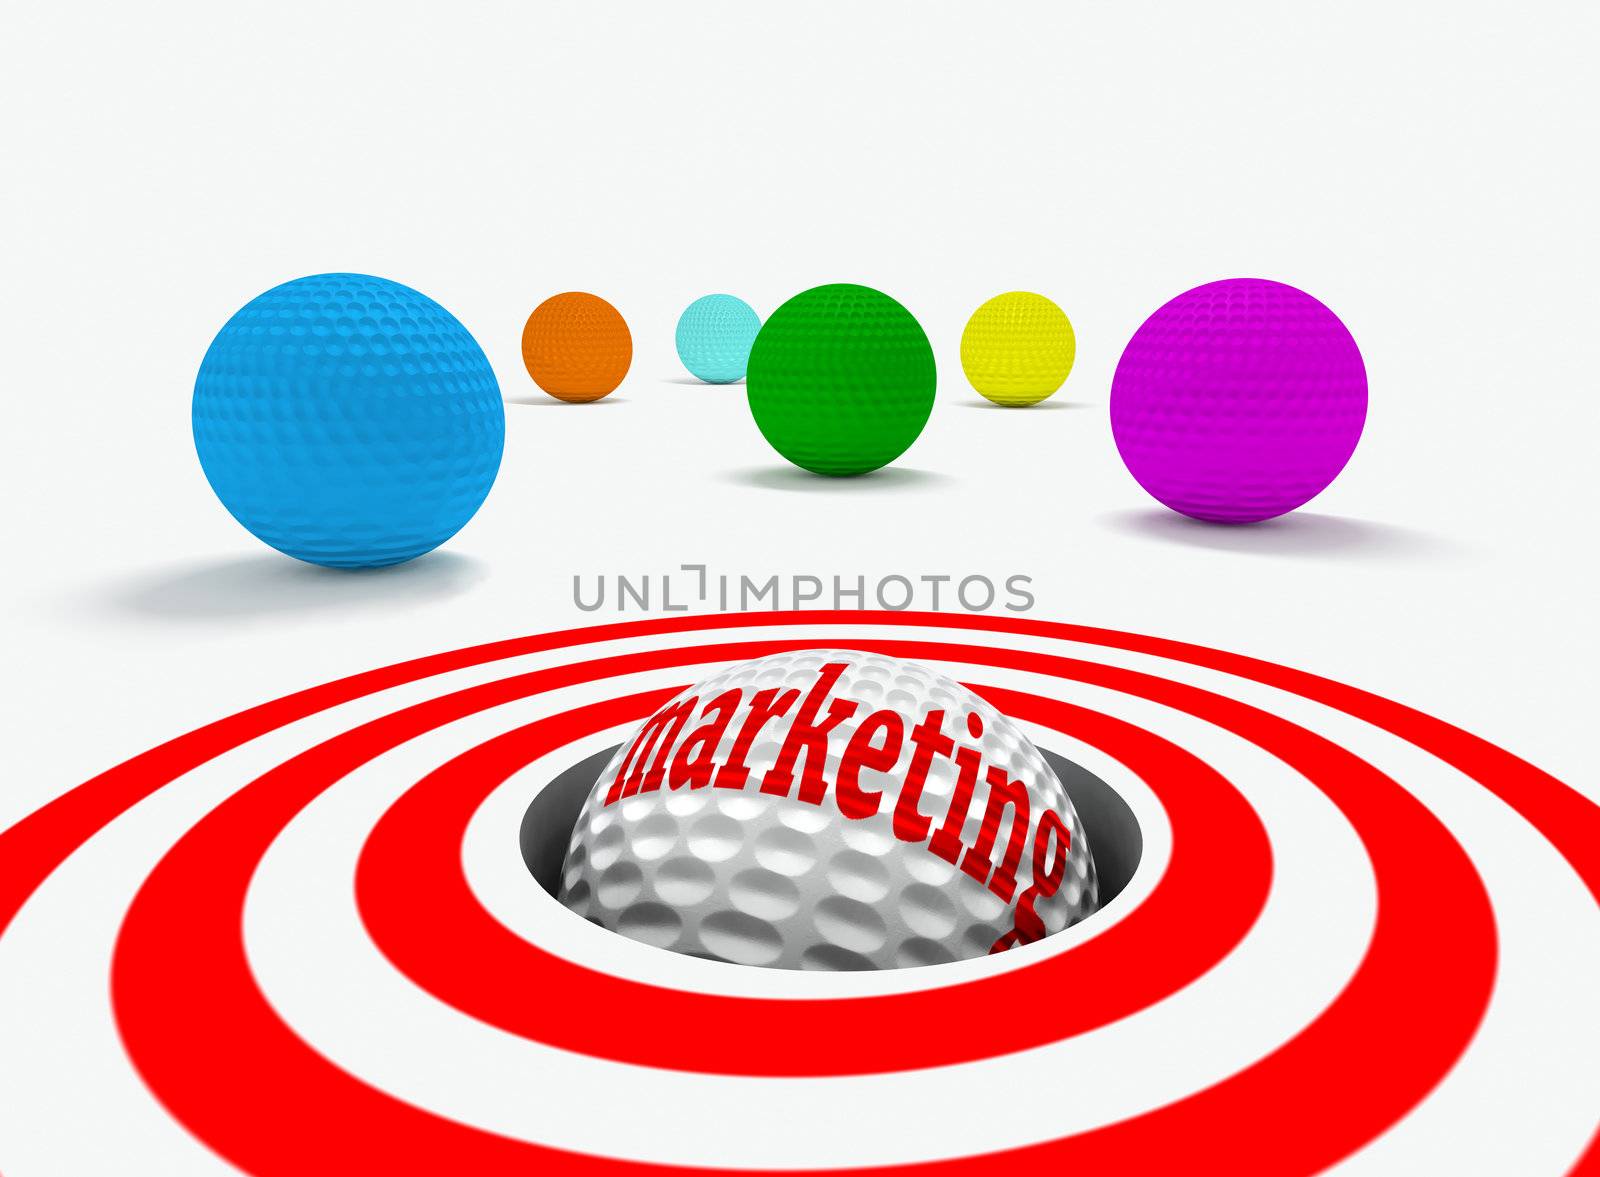 Conceptual 3d image of marketing with golf balls